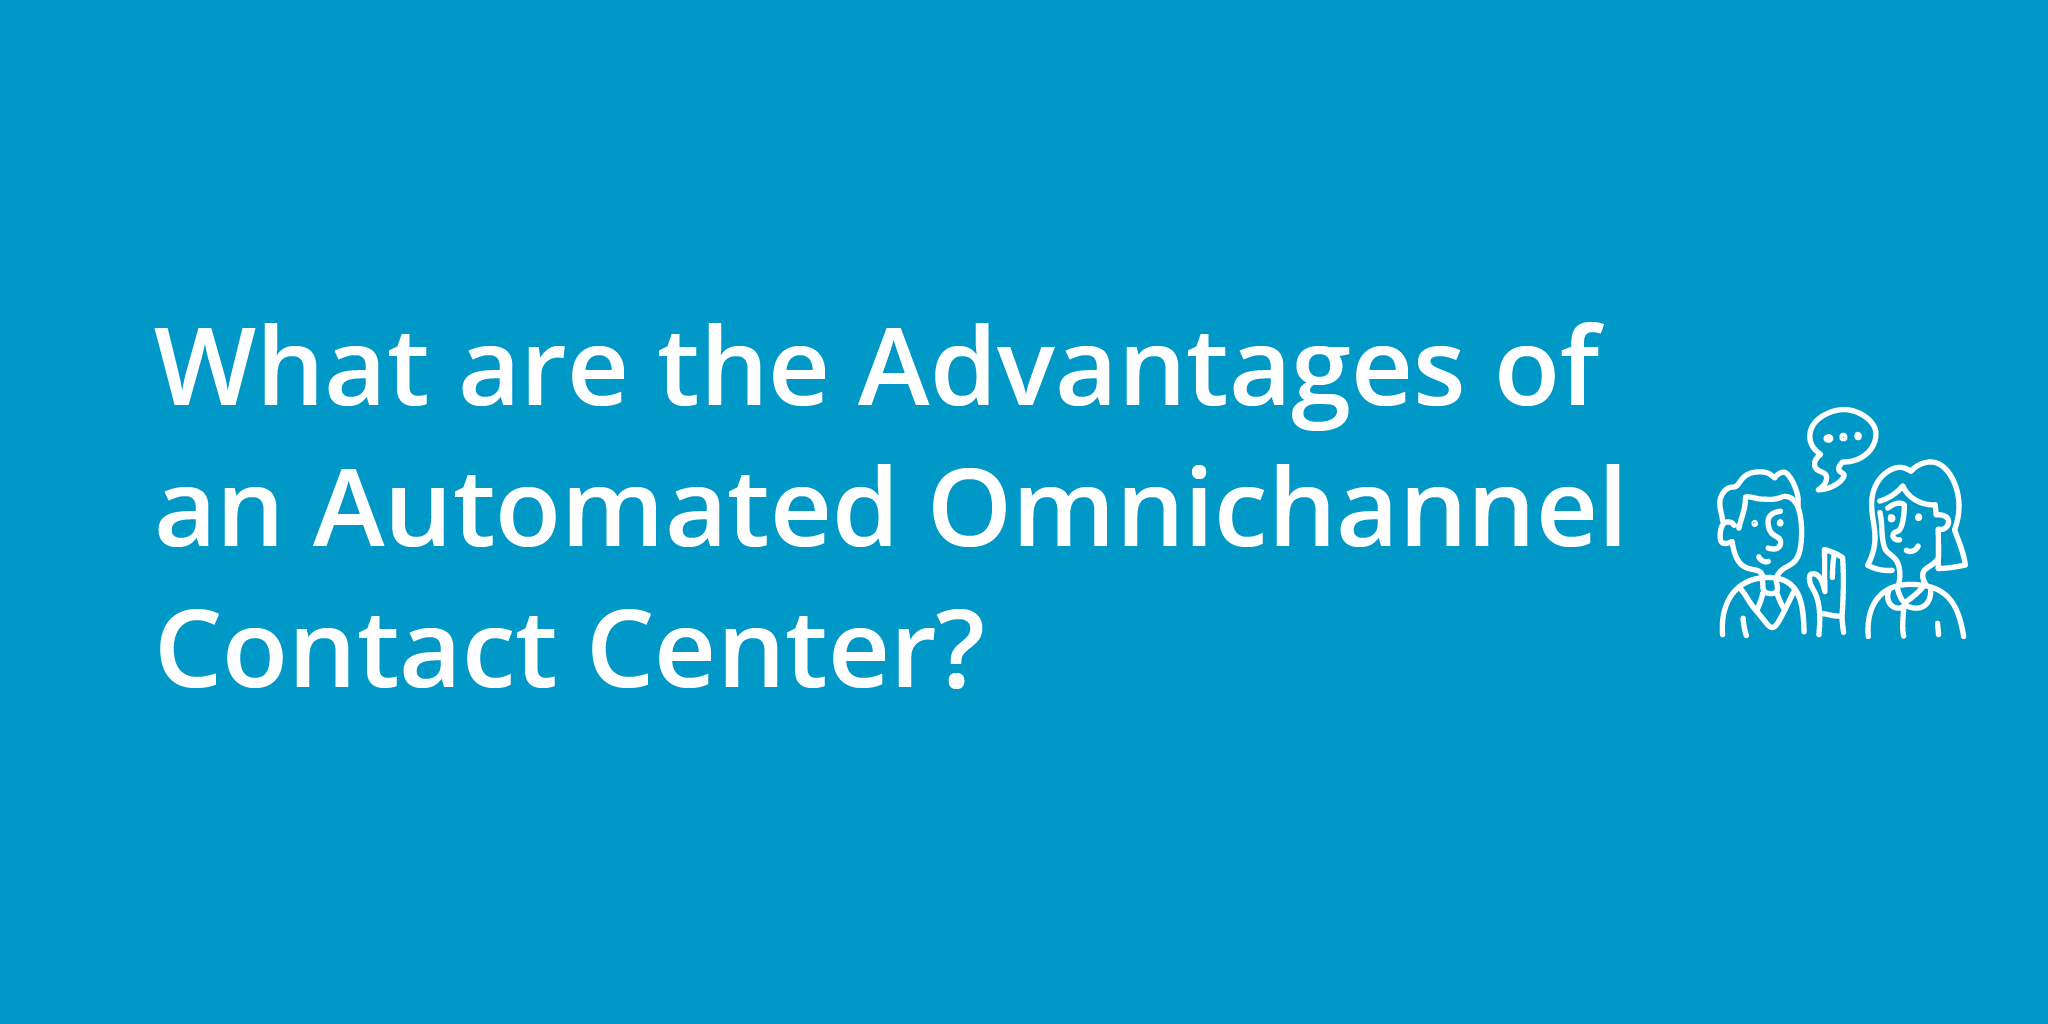 What are the Advantages of an Automated Omnichannel Contact Center? | Telephones for business